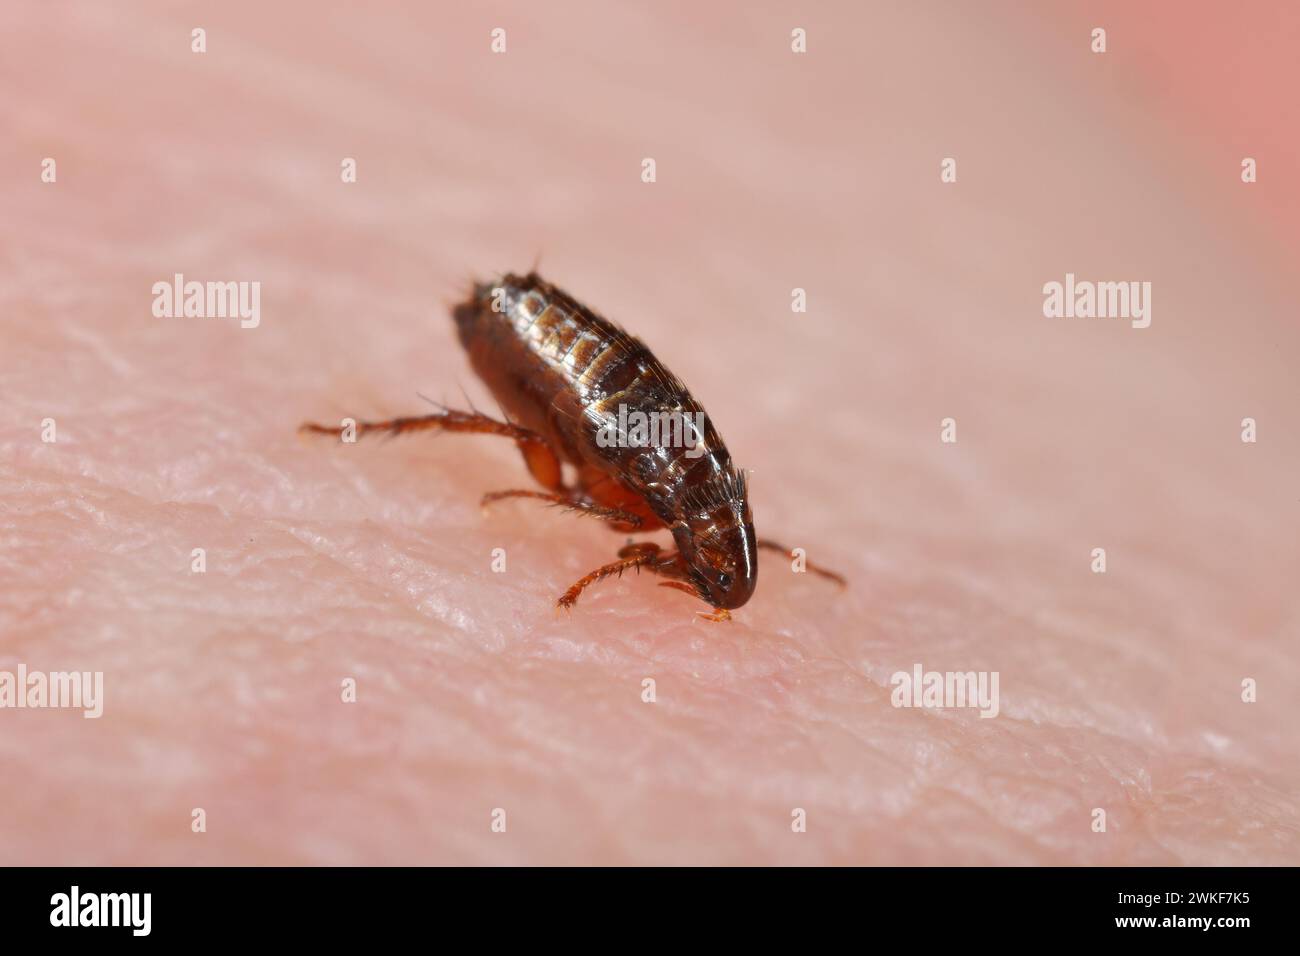 Flea. Insect biting and drinking blood on human skin. Stock Photo